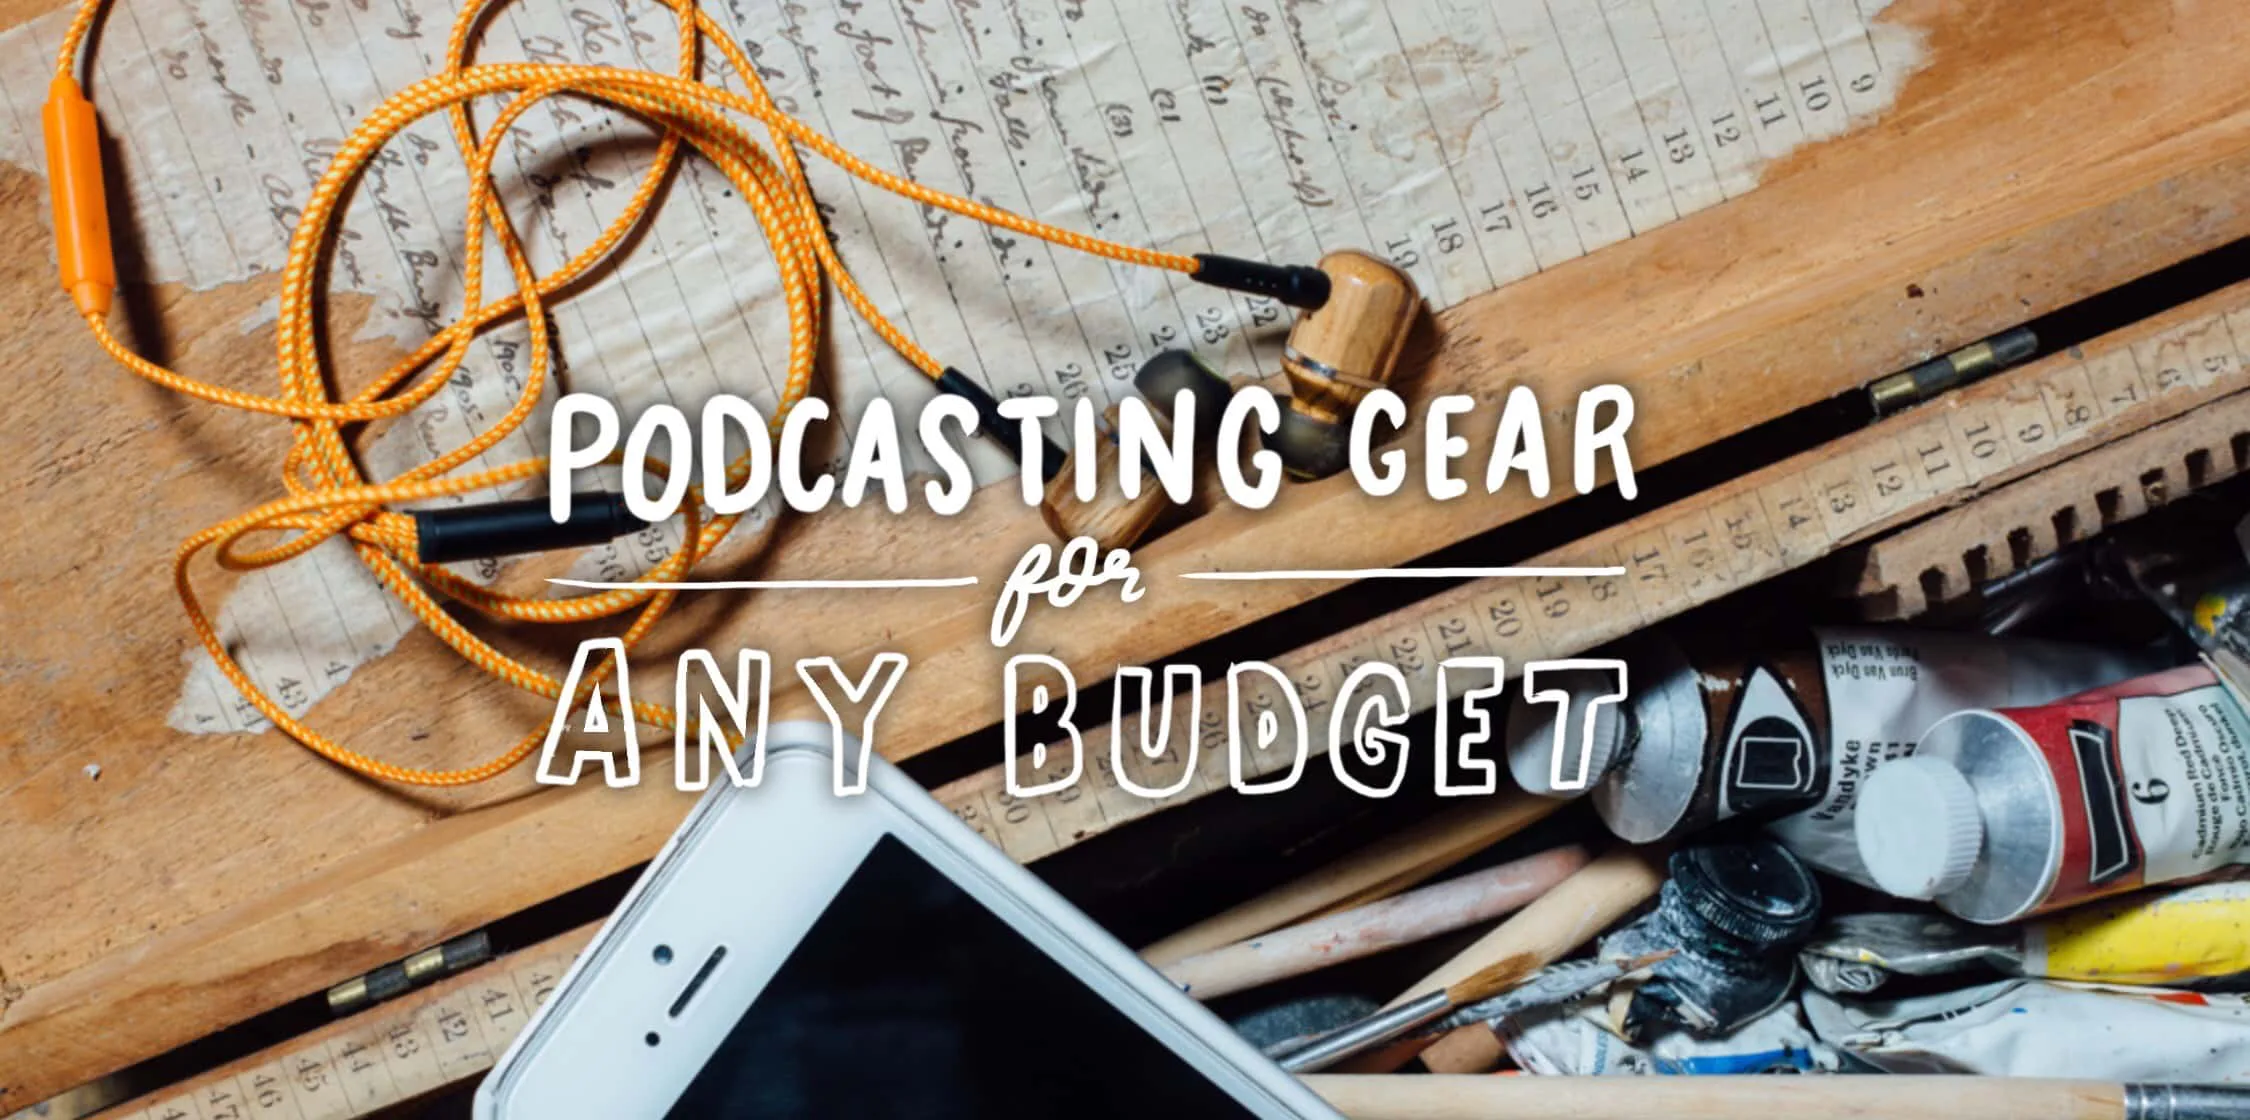 Podcast Equipment: The Gear You Need to Start Recording on Any Budget